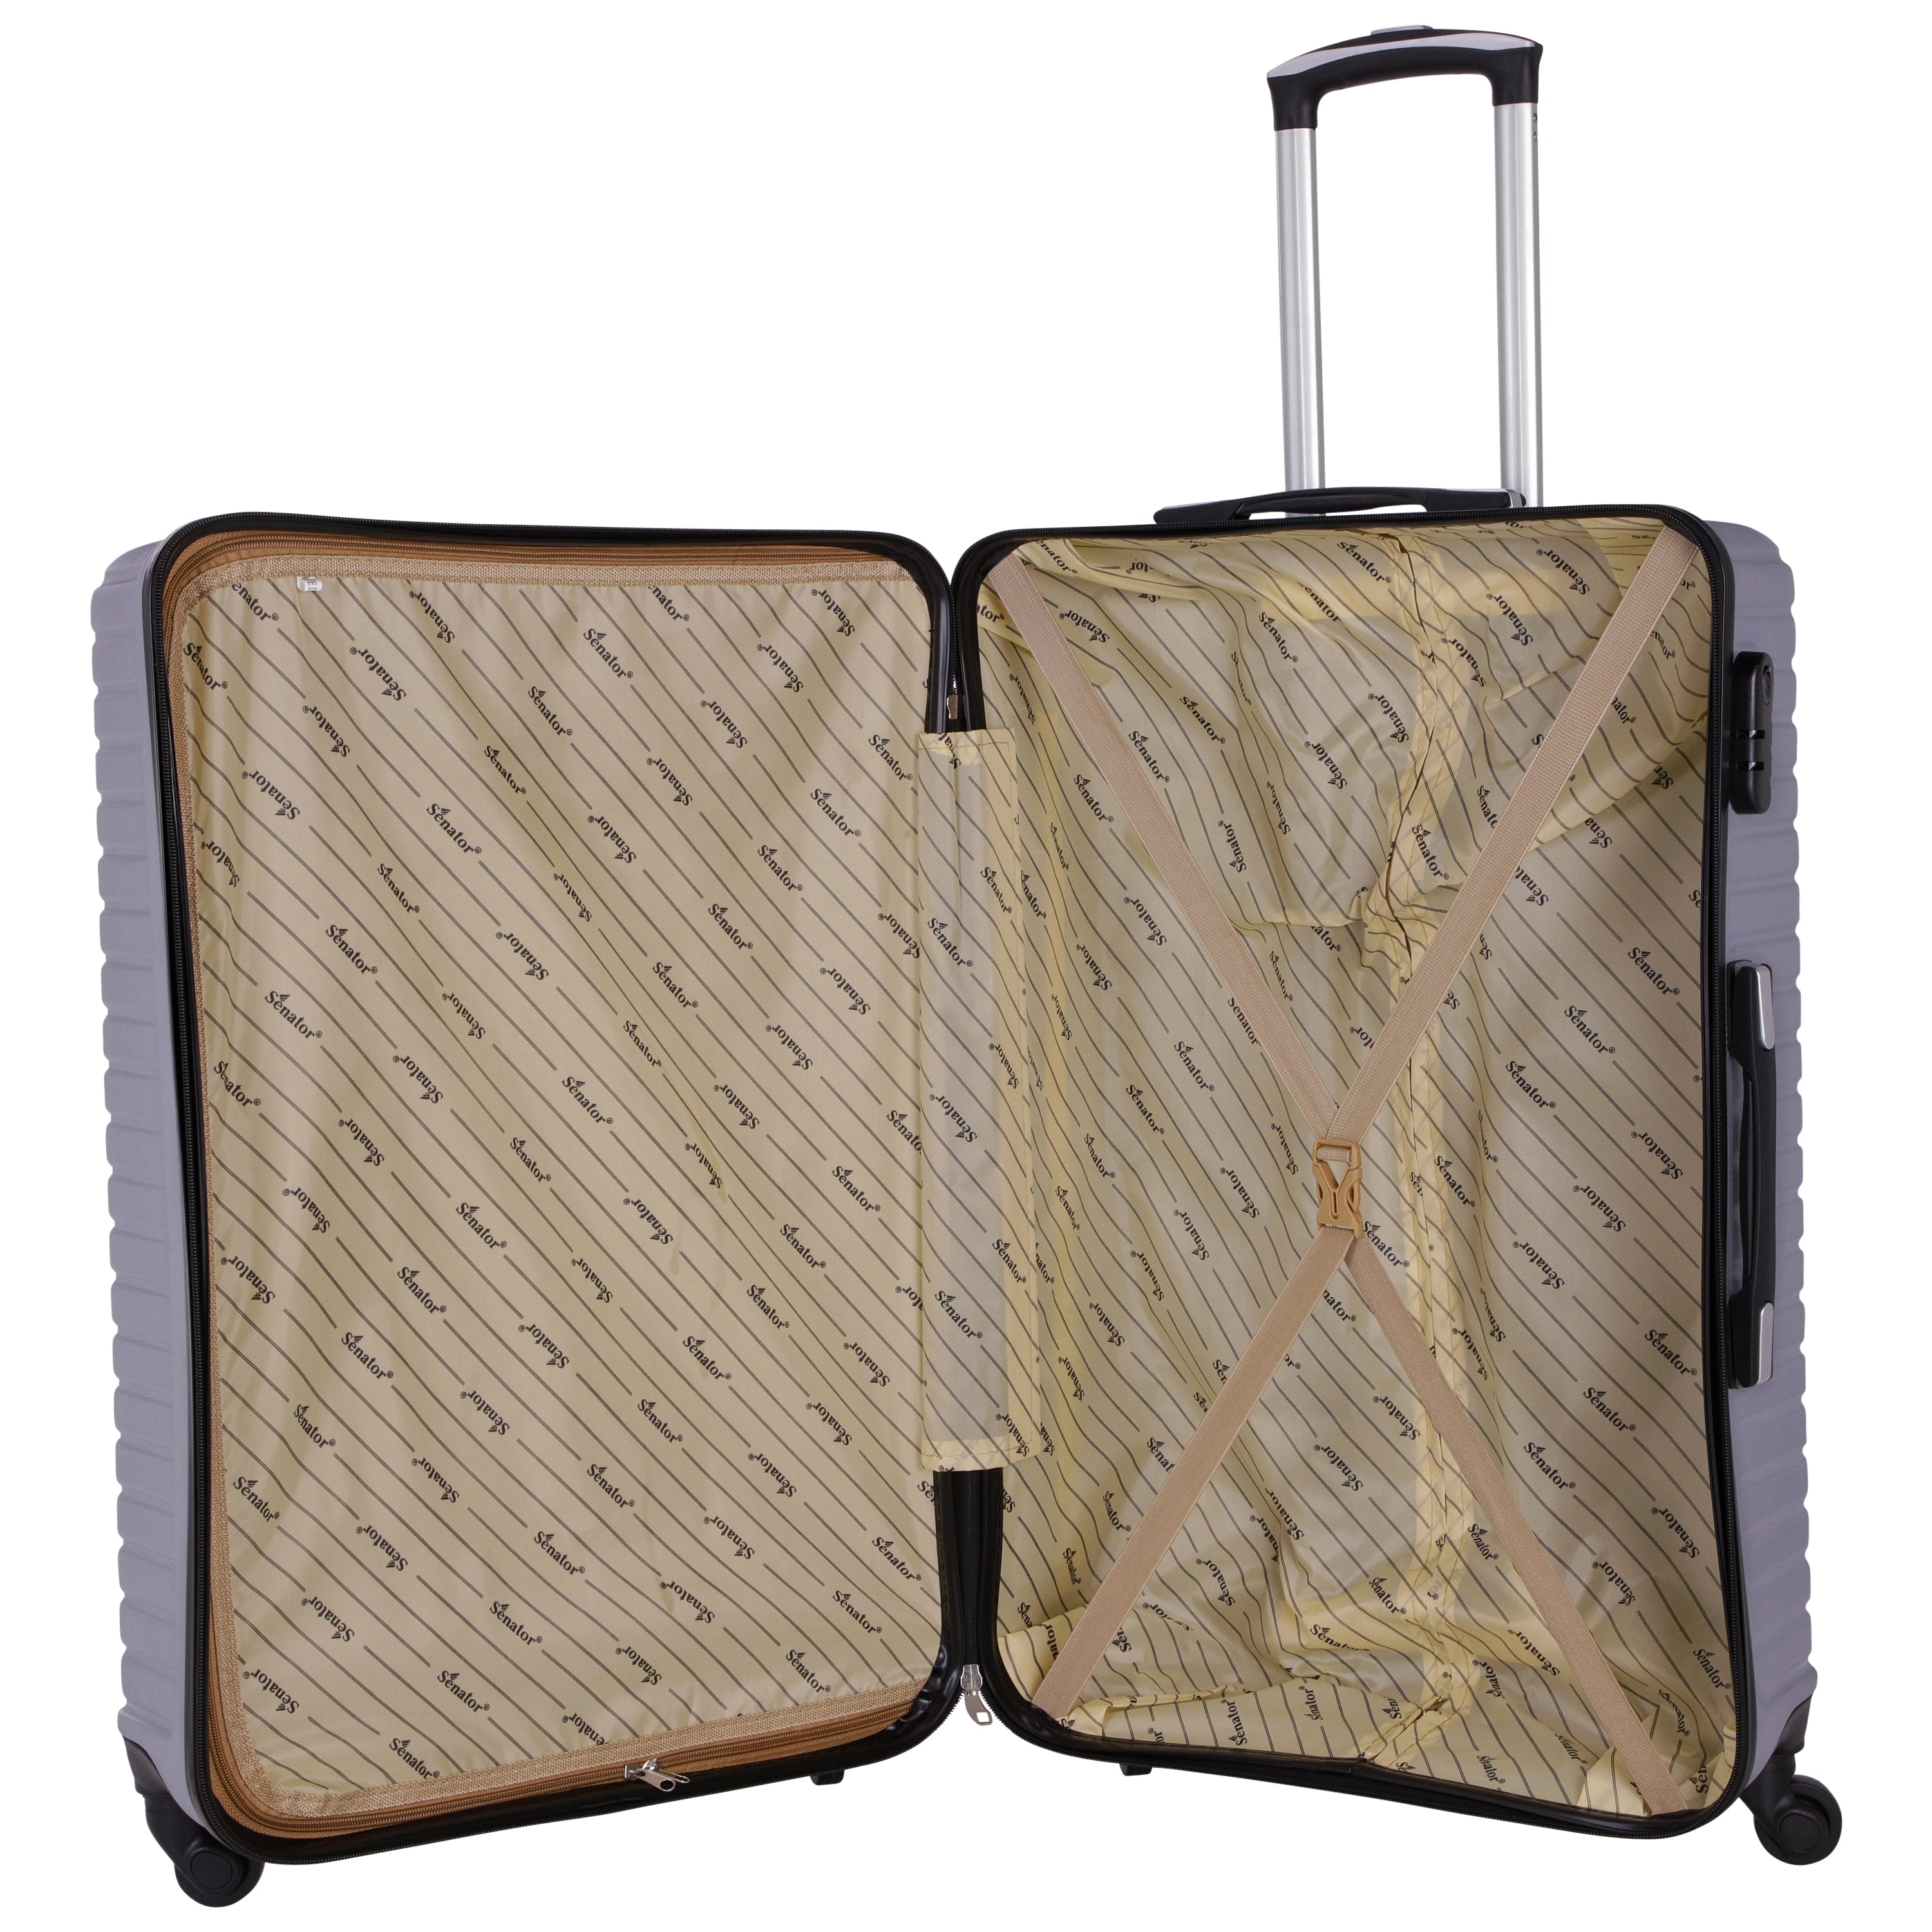 Cabin size Carry-on trolley by Senator luggage (KH9035-20) - buyluggageonline